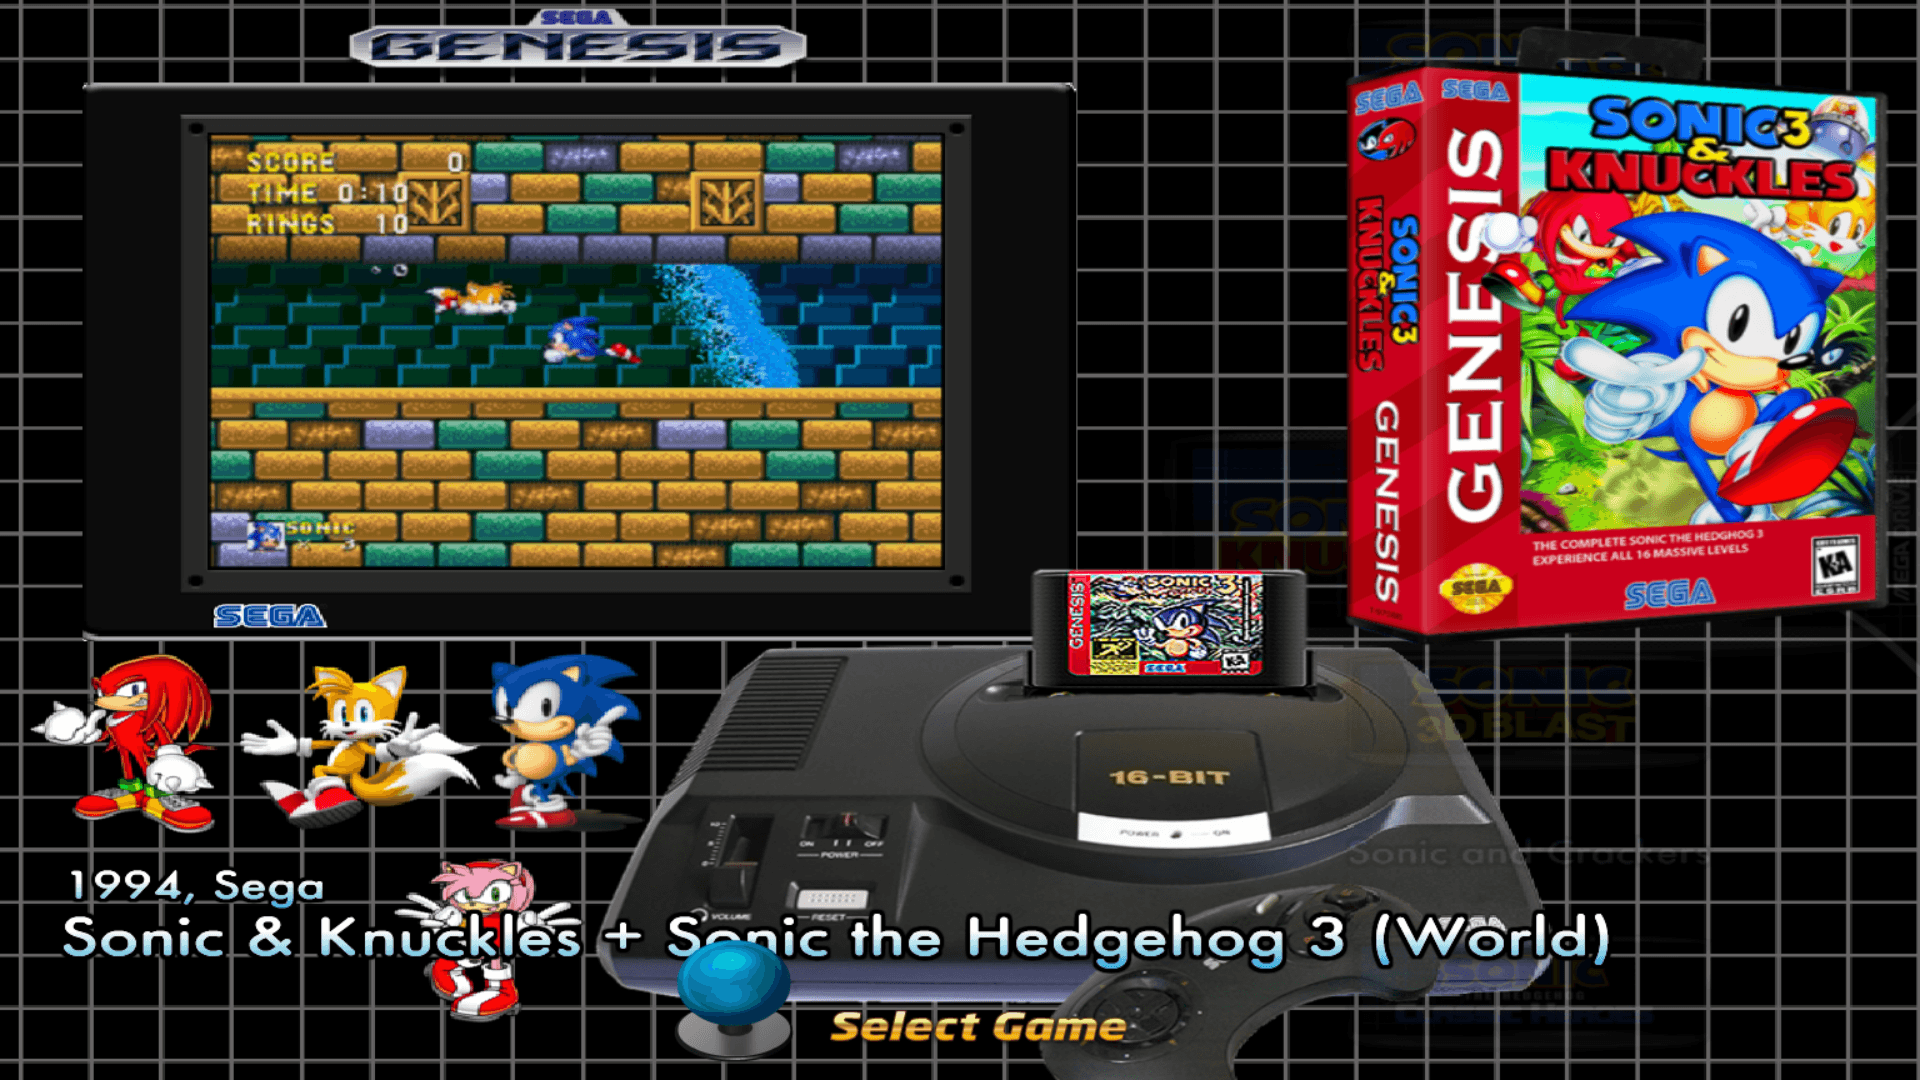 Sega Genesis Default Theme with ALL artwork included